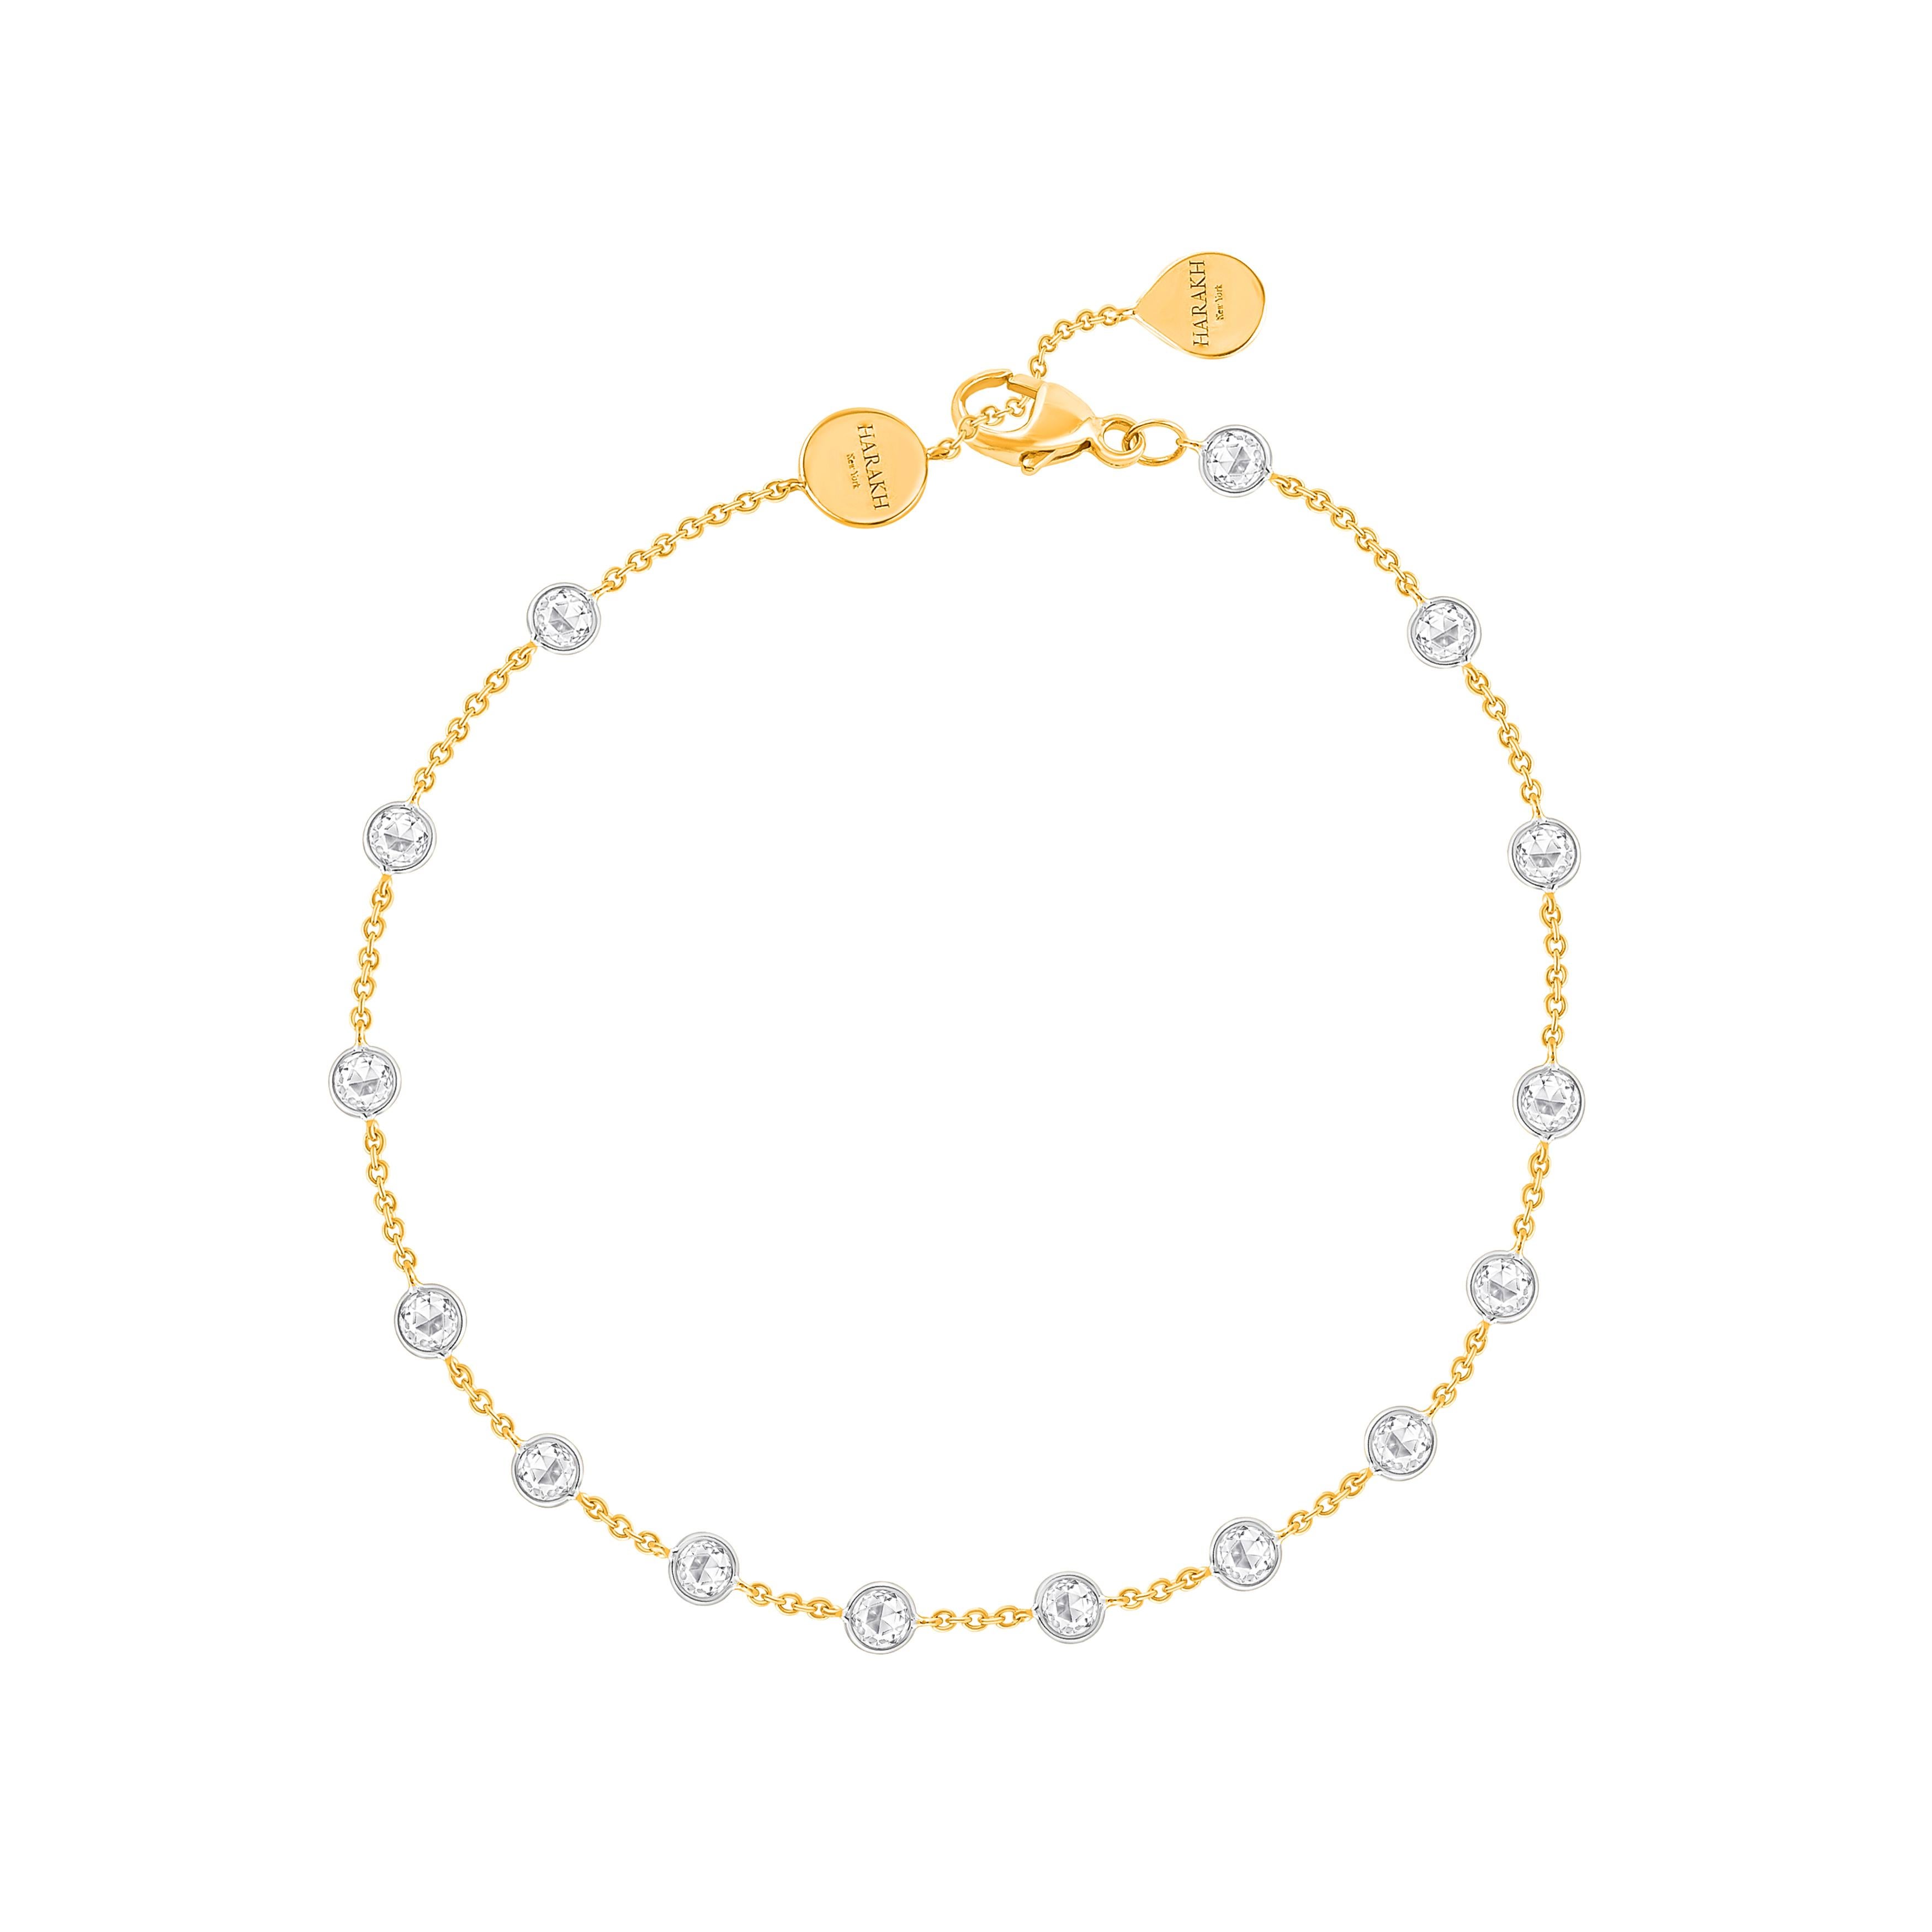 Inspired by the JOY of experiencing a gushing waterfall, this elegantly designed bracelet is studded with 1/2 carat natural rose cut colorless diamonds in a prong setting, beautifully crafted in 18 KT White and Yellow gold. Our diamonds are graded